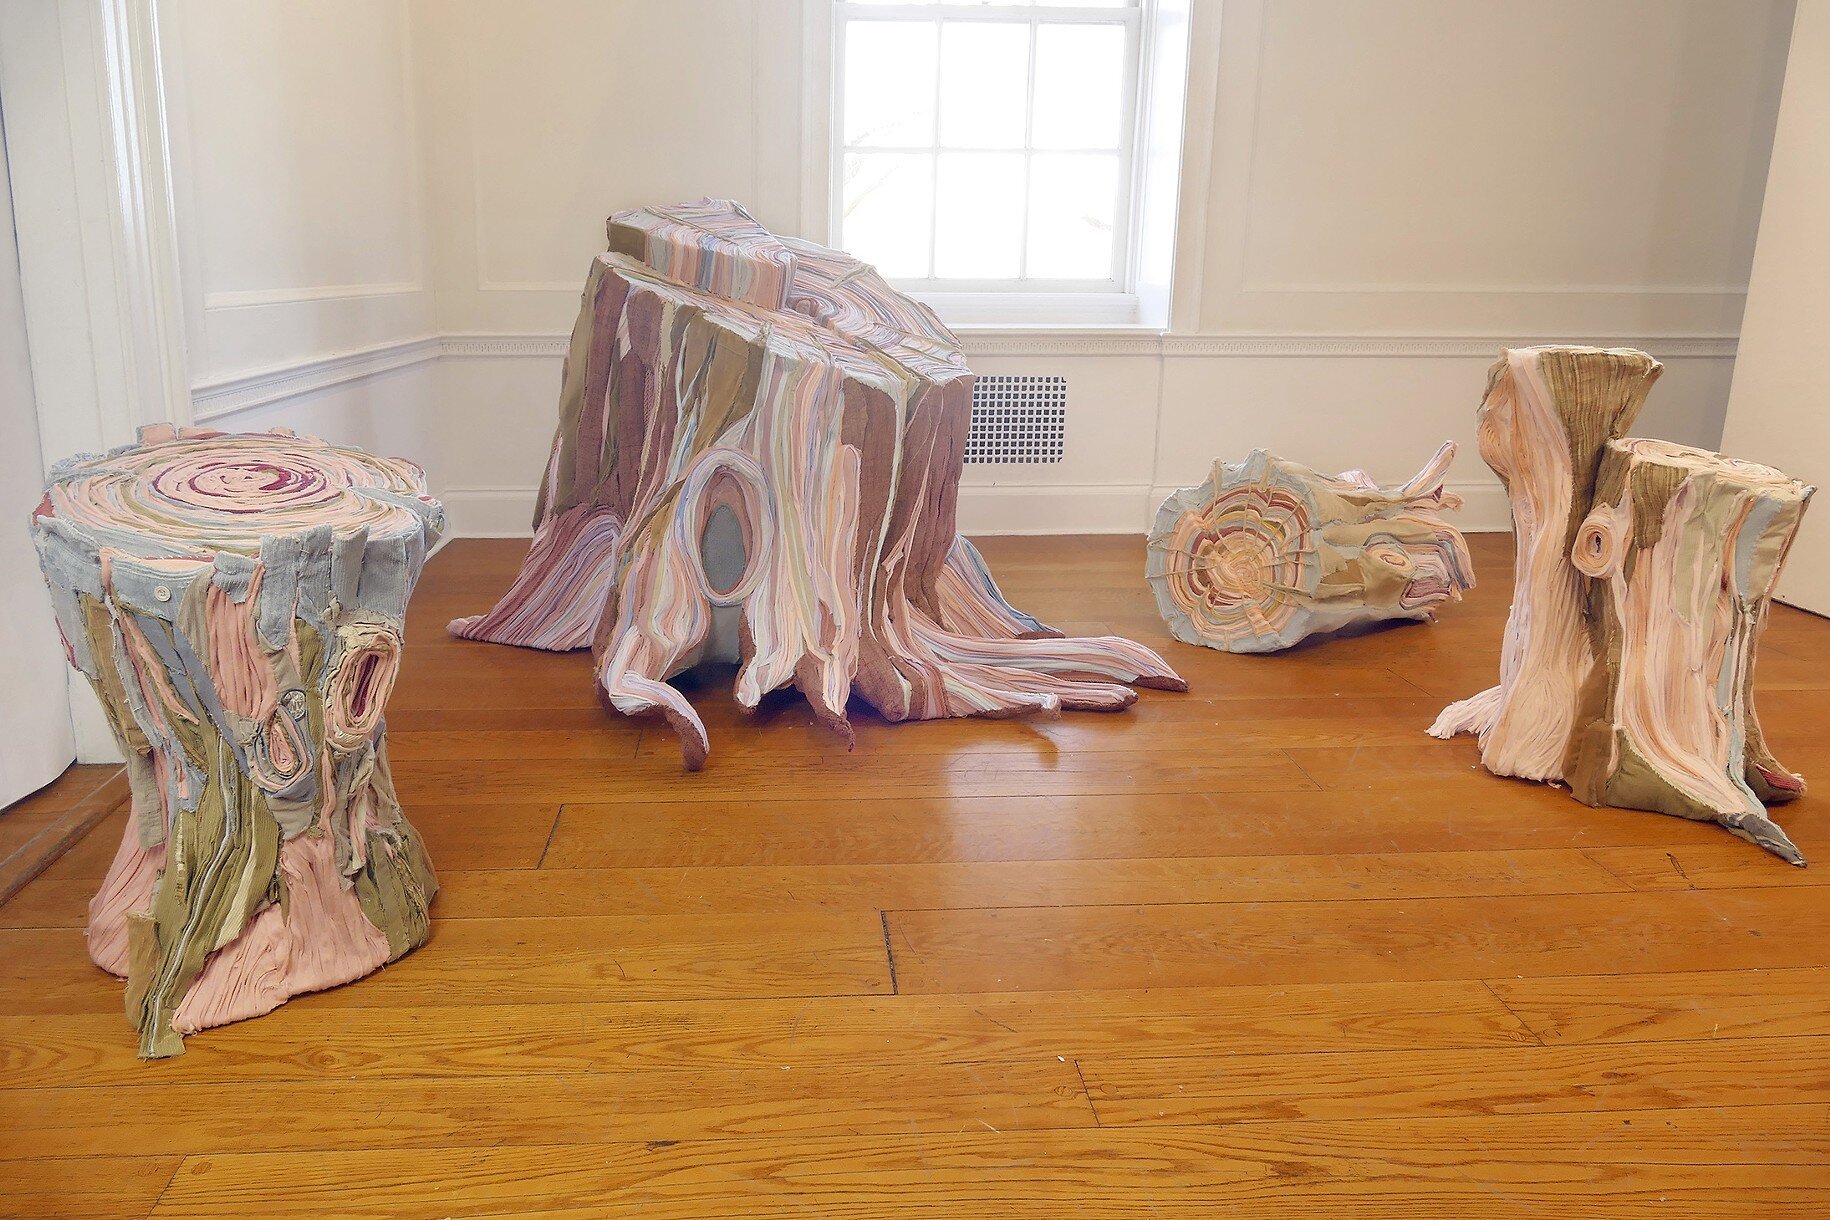 Nature Made Flesh, Installation View at Wave Hill Garden, Bronx, NY 2018